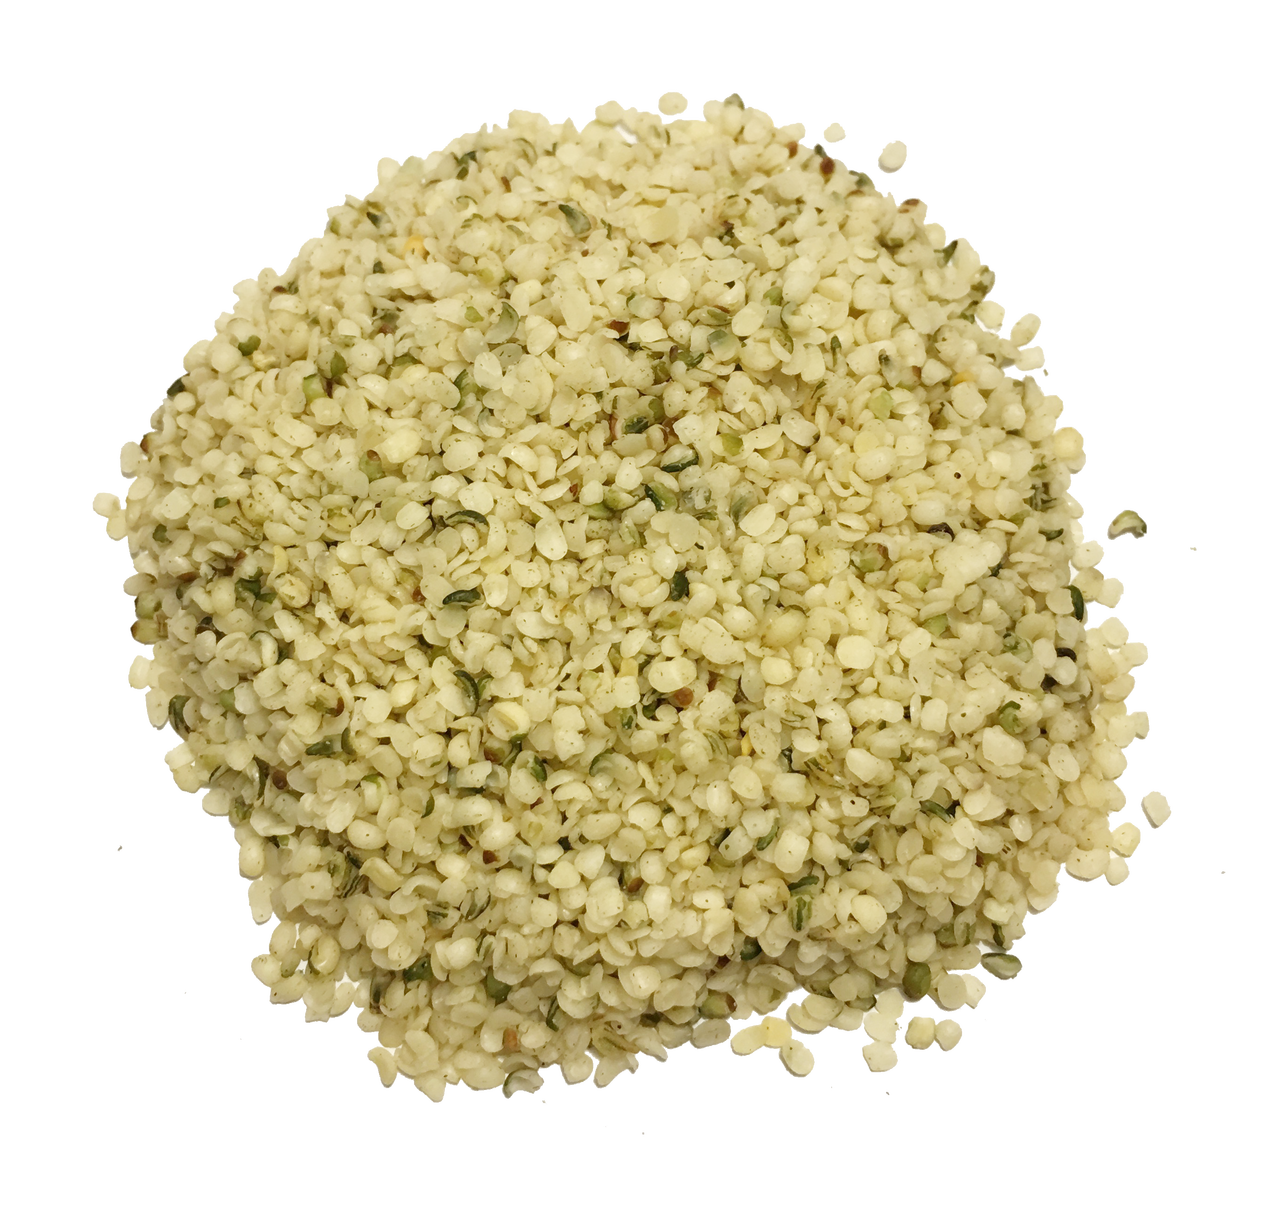 Sprouted Organic Hulled Hemp Seeds